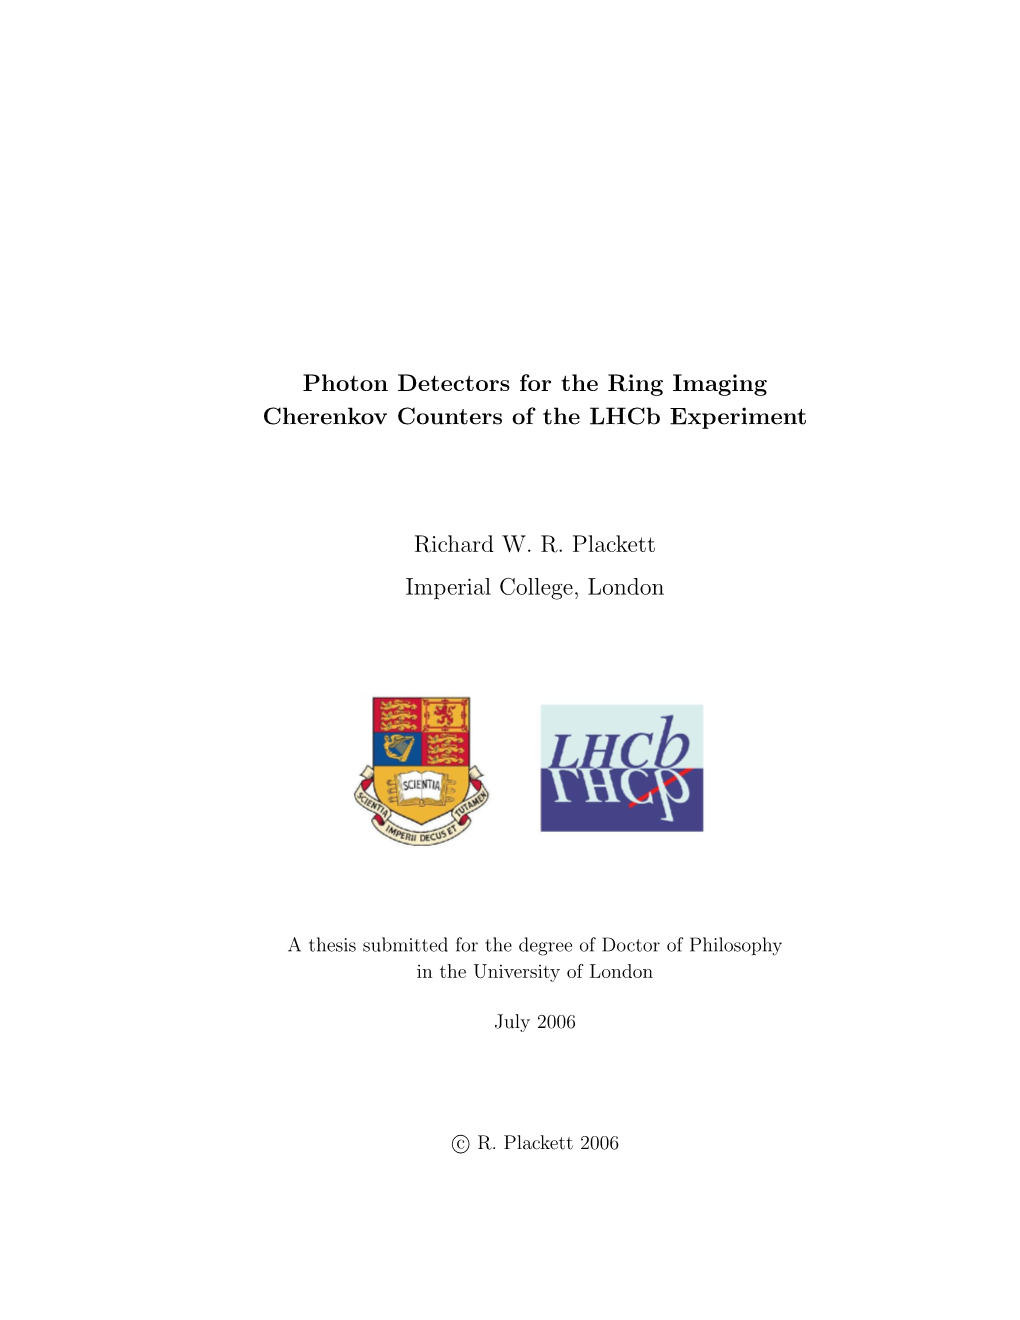 Photon Detectors for the Ring Imaging Cherenkov Counters of the Lhcb Experiment